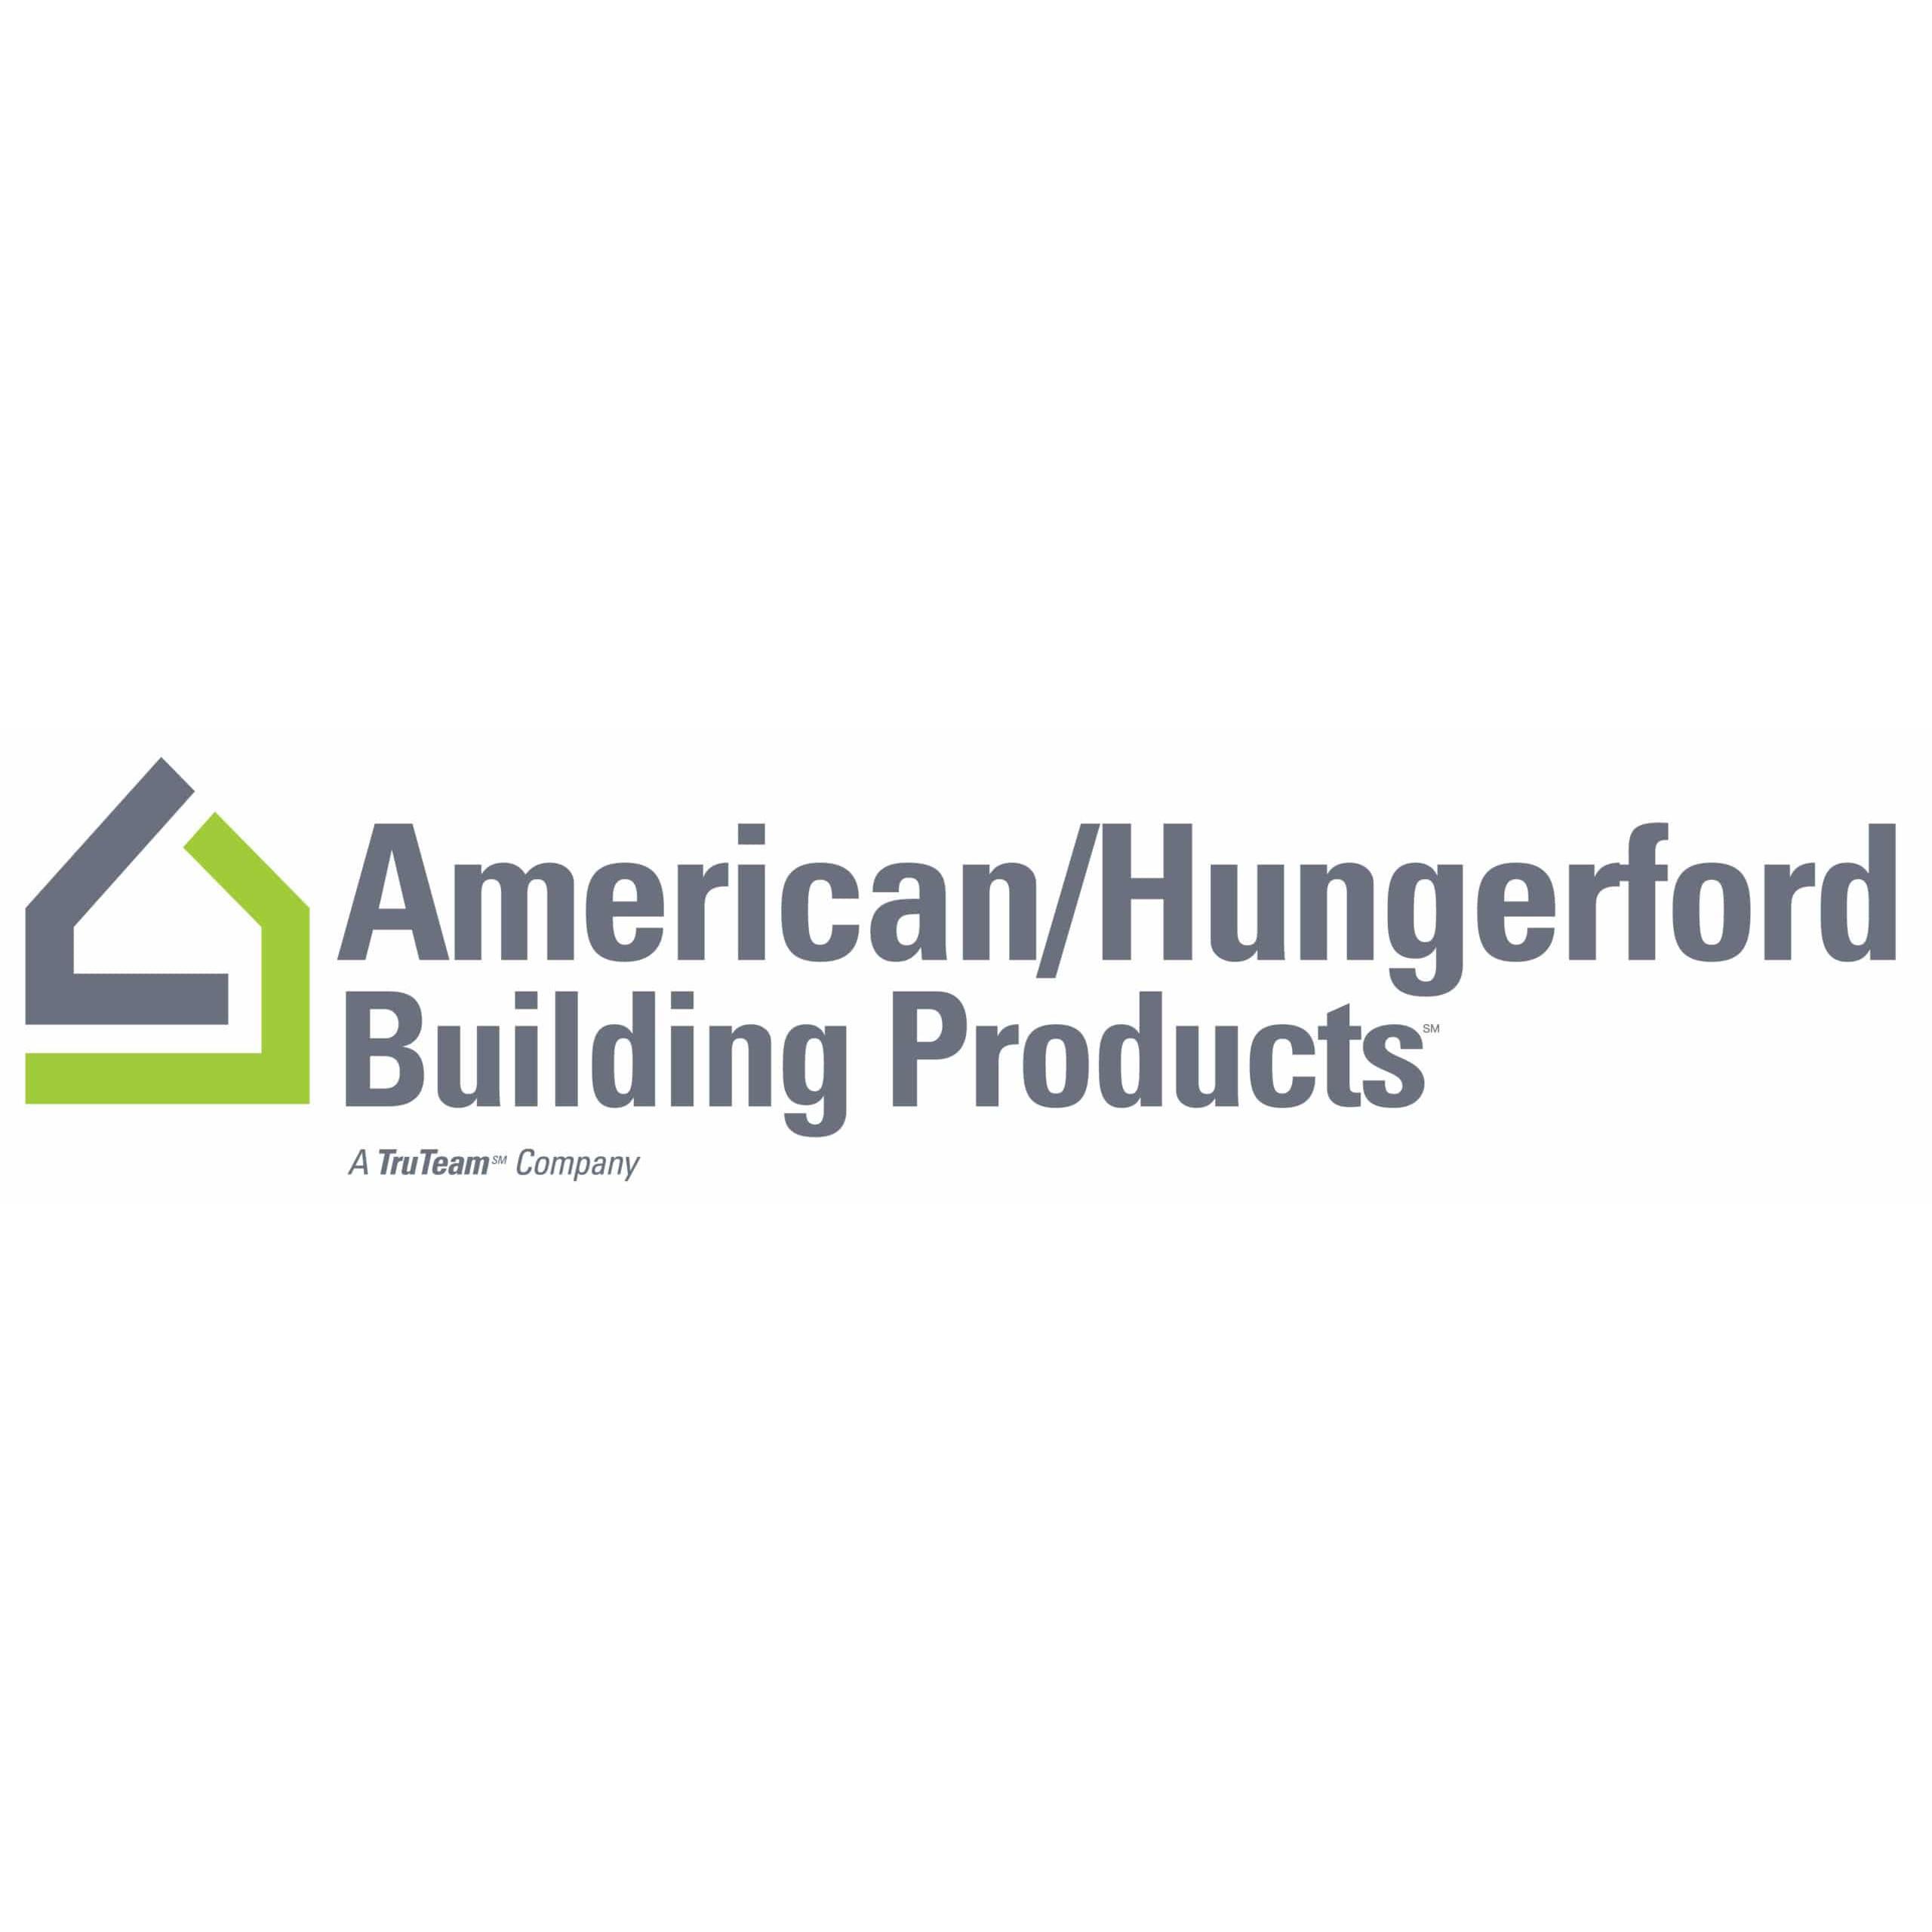 American/Hungerford Build Prod